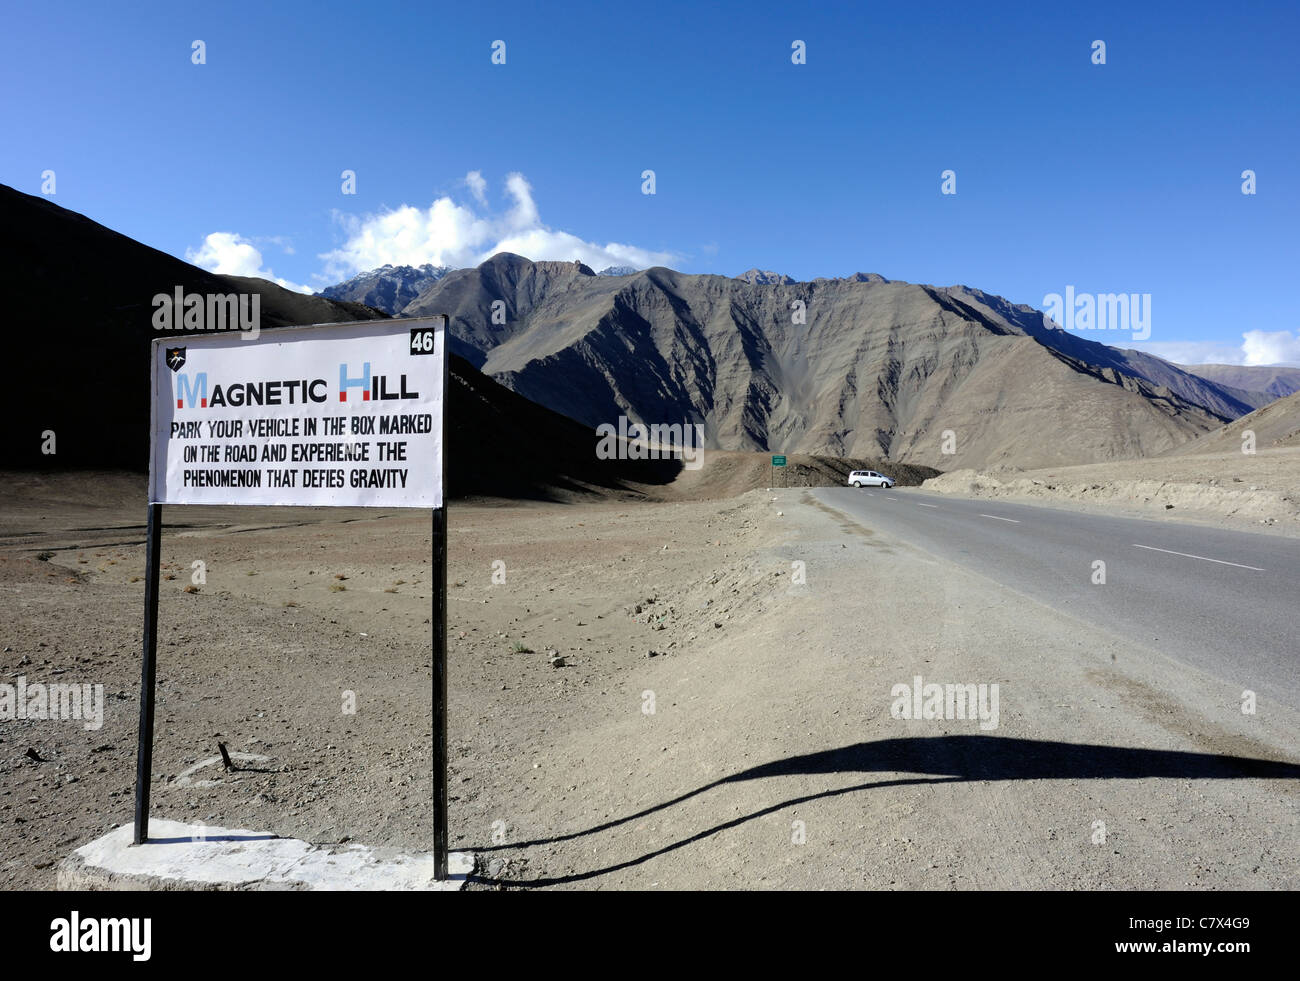 Sign for Magnetic Hill on the road from Leh to Kargil that claims to defy gravity. Near Nimu, Ladakh, Republic of India. Stock Photo